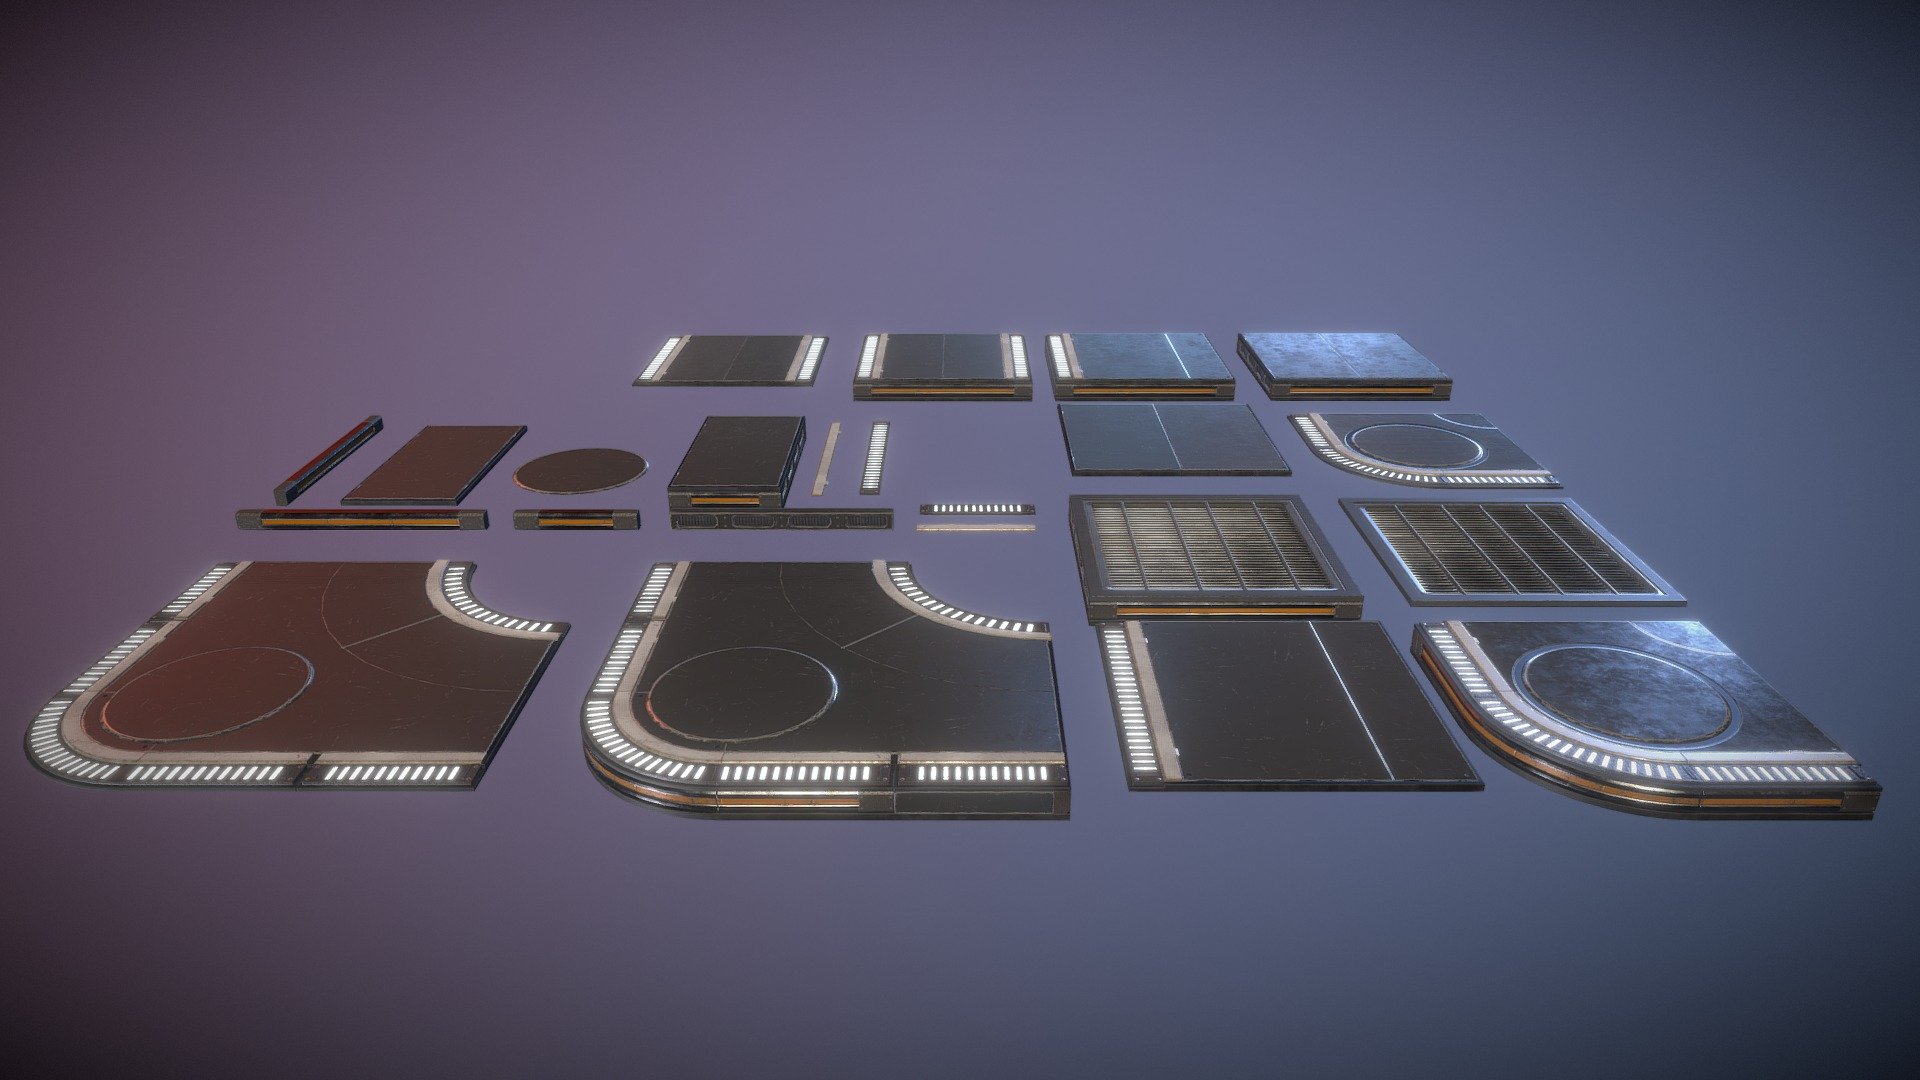 Sci-Fi Floor addon kit 1 .  This kit is an addon kit for the Sci-Fi parts kit which adds 23 models, a variety of floors and floor details to enhance your retro sci fi environment! - Sci Fi Floors Kit 1 - Buy Royalty Free 3D model by rickknox3d 3d model